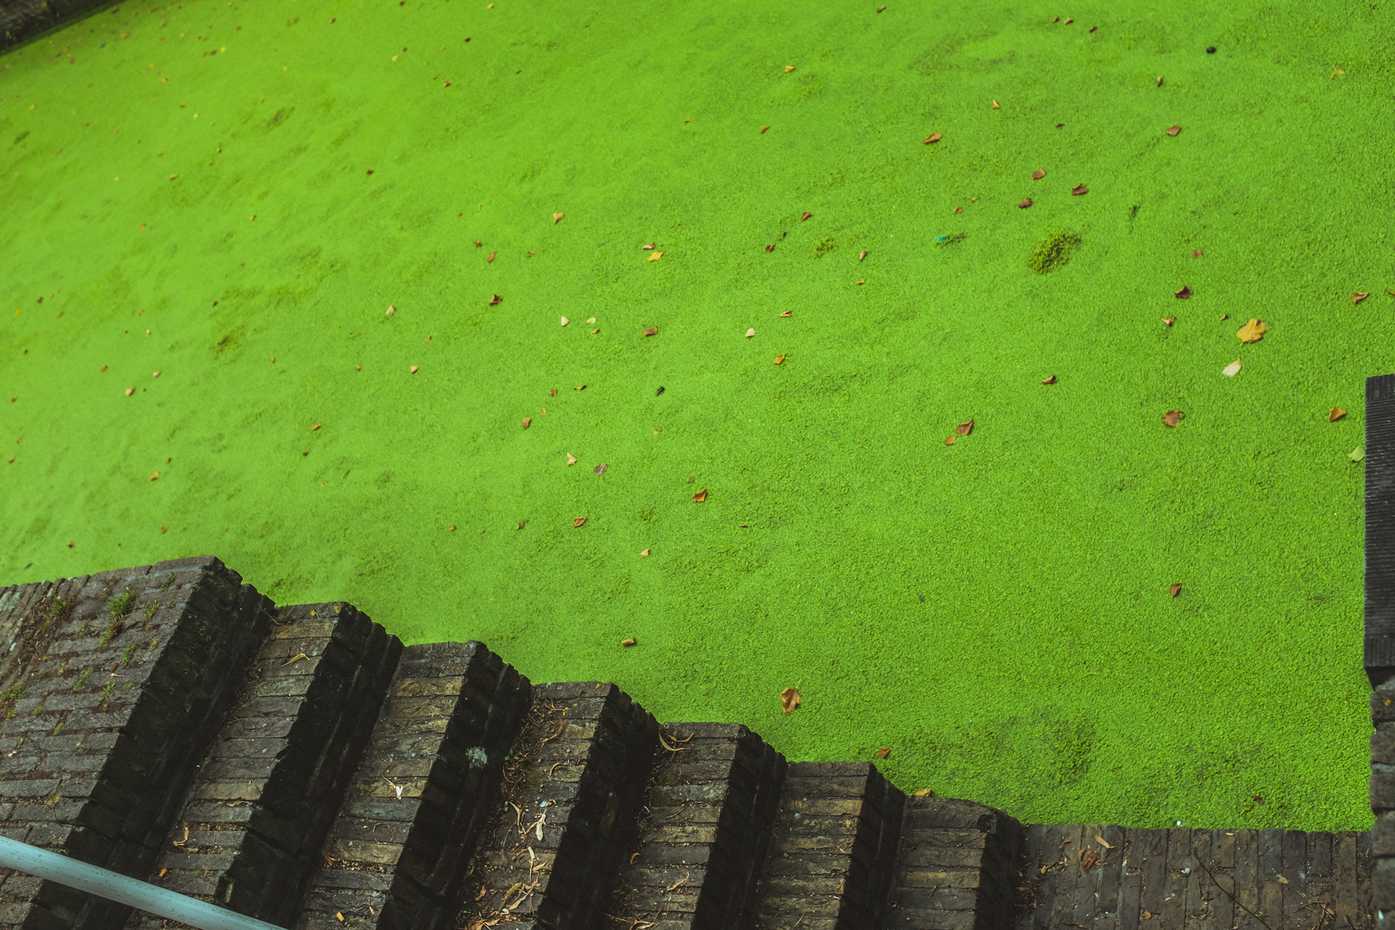 A canal covered in bright-green duckweed